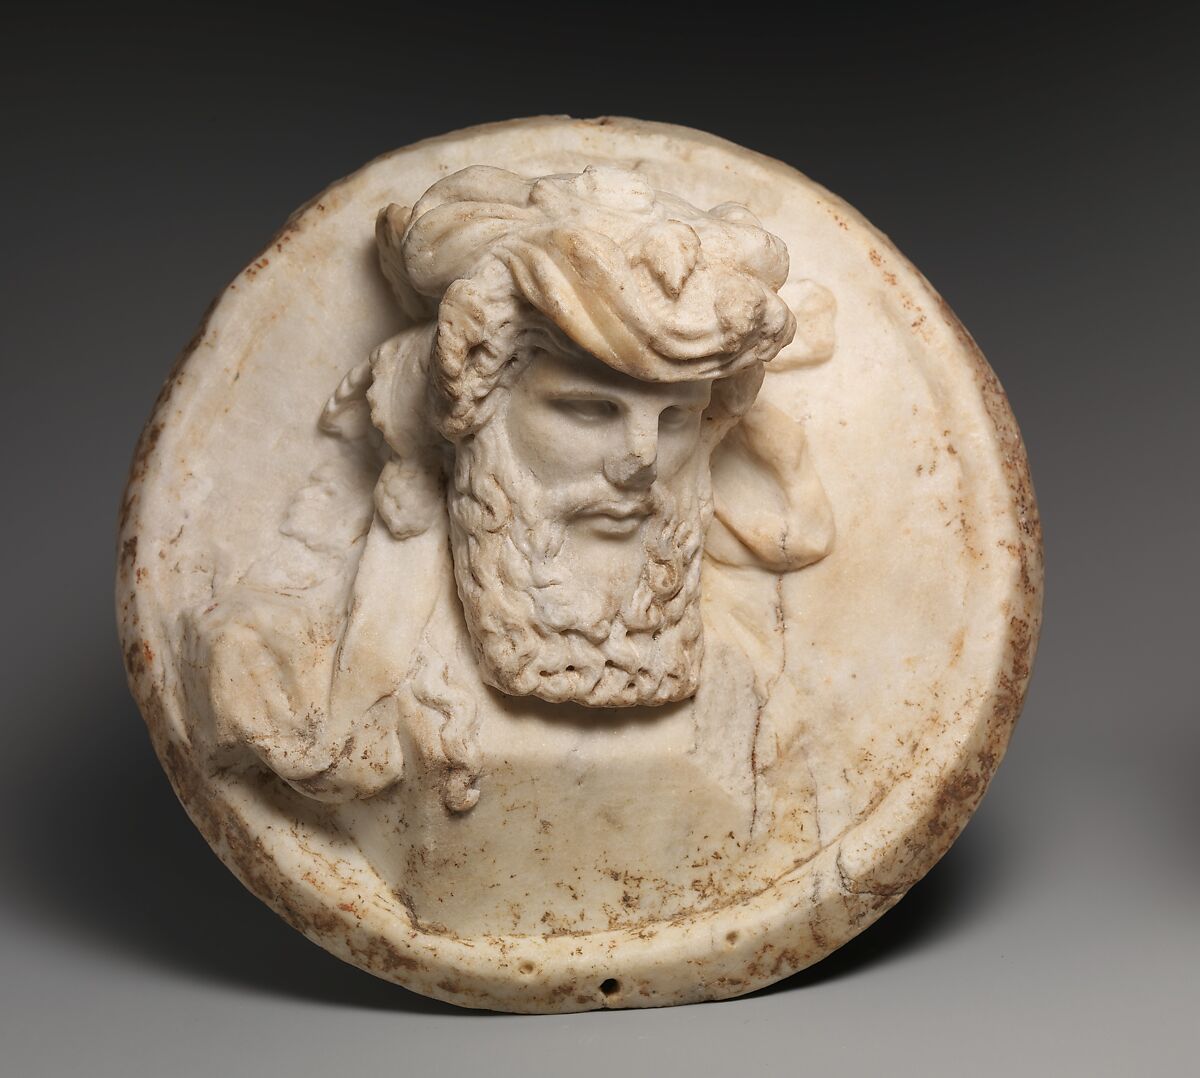 Marble disk with a herm of Dionysus in relief